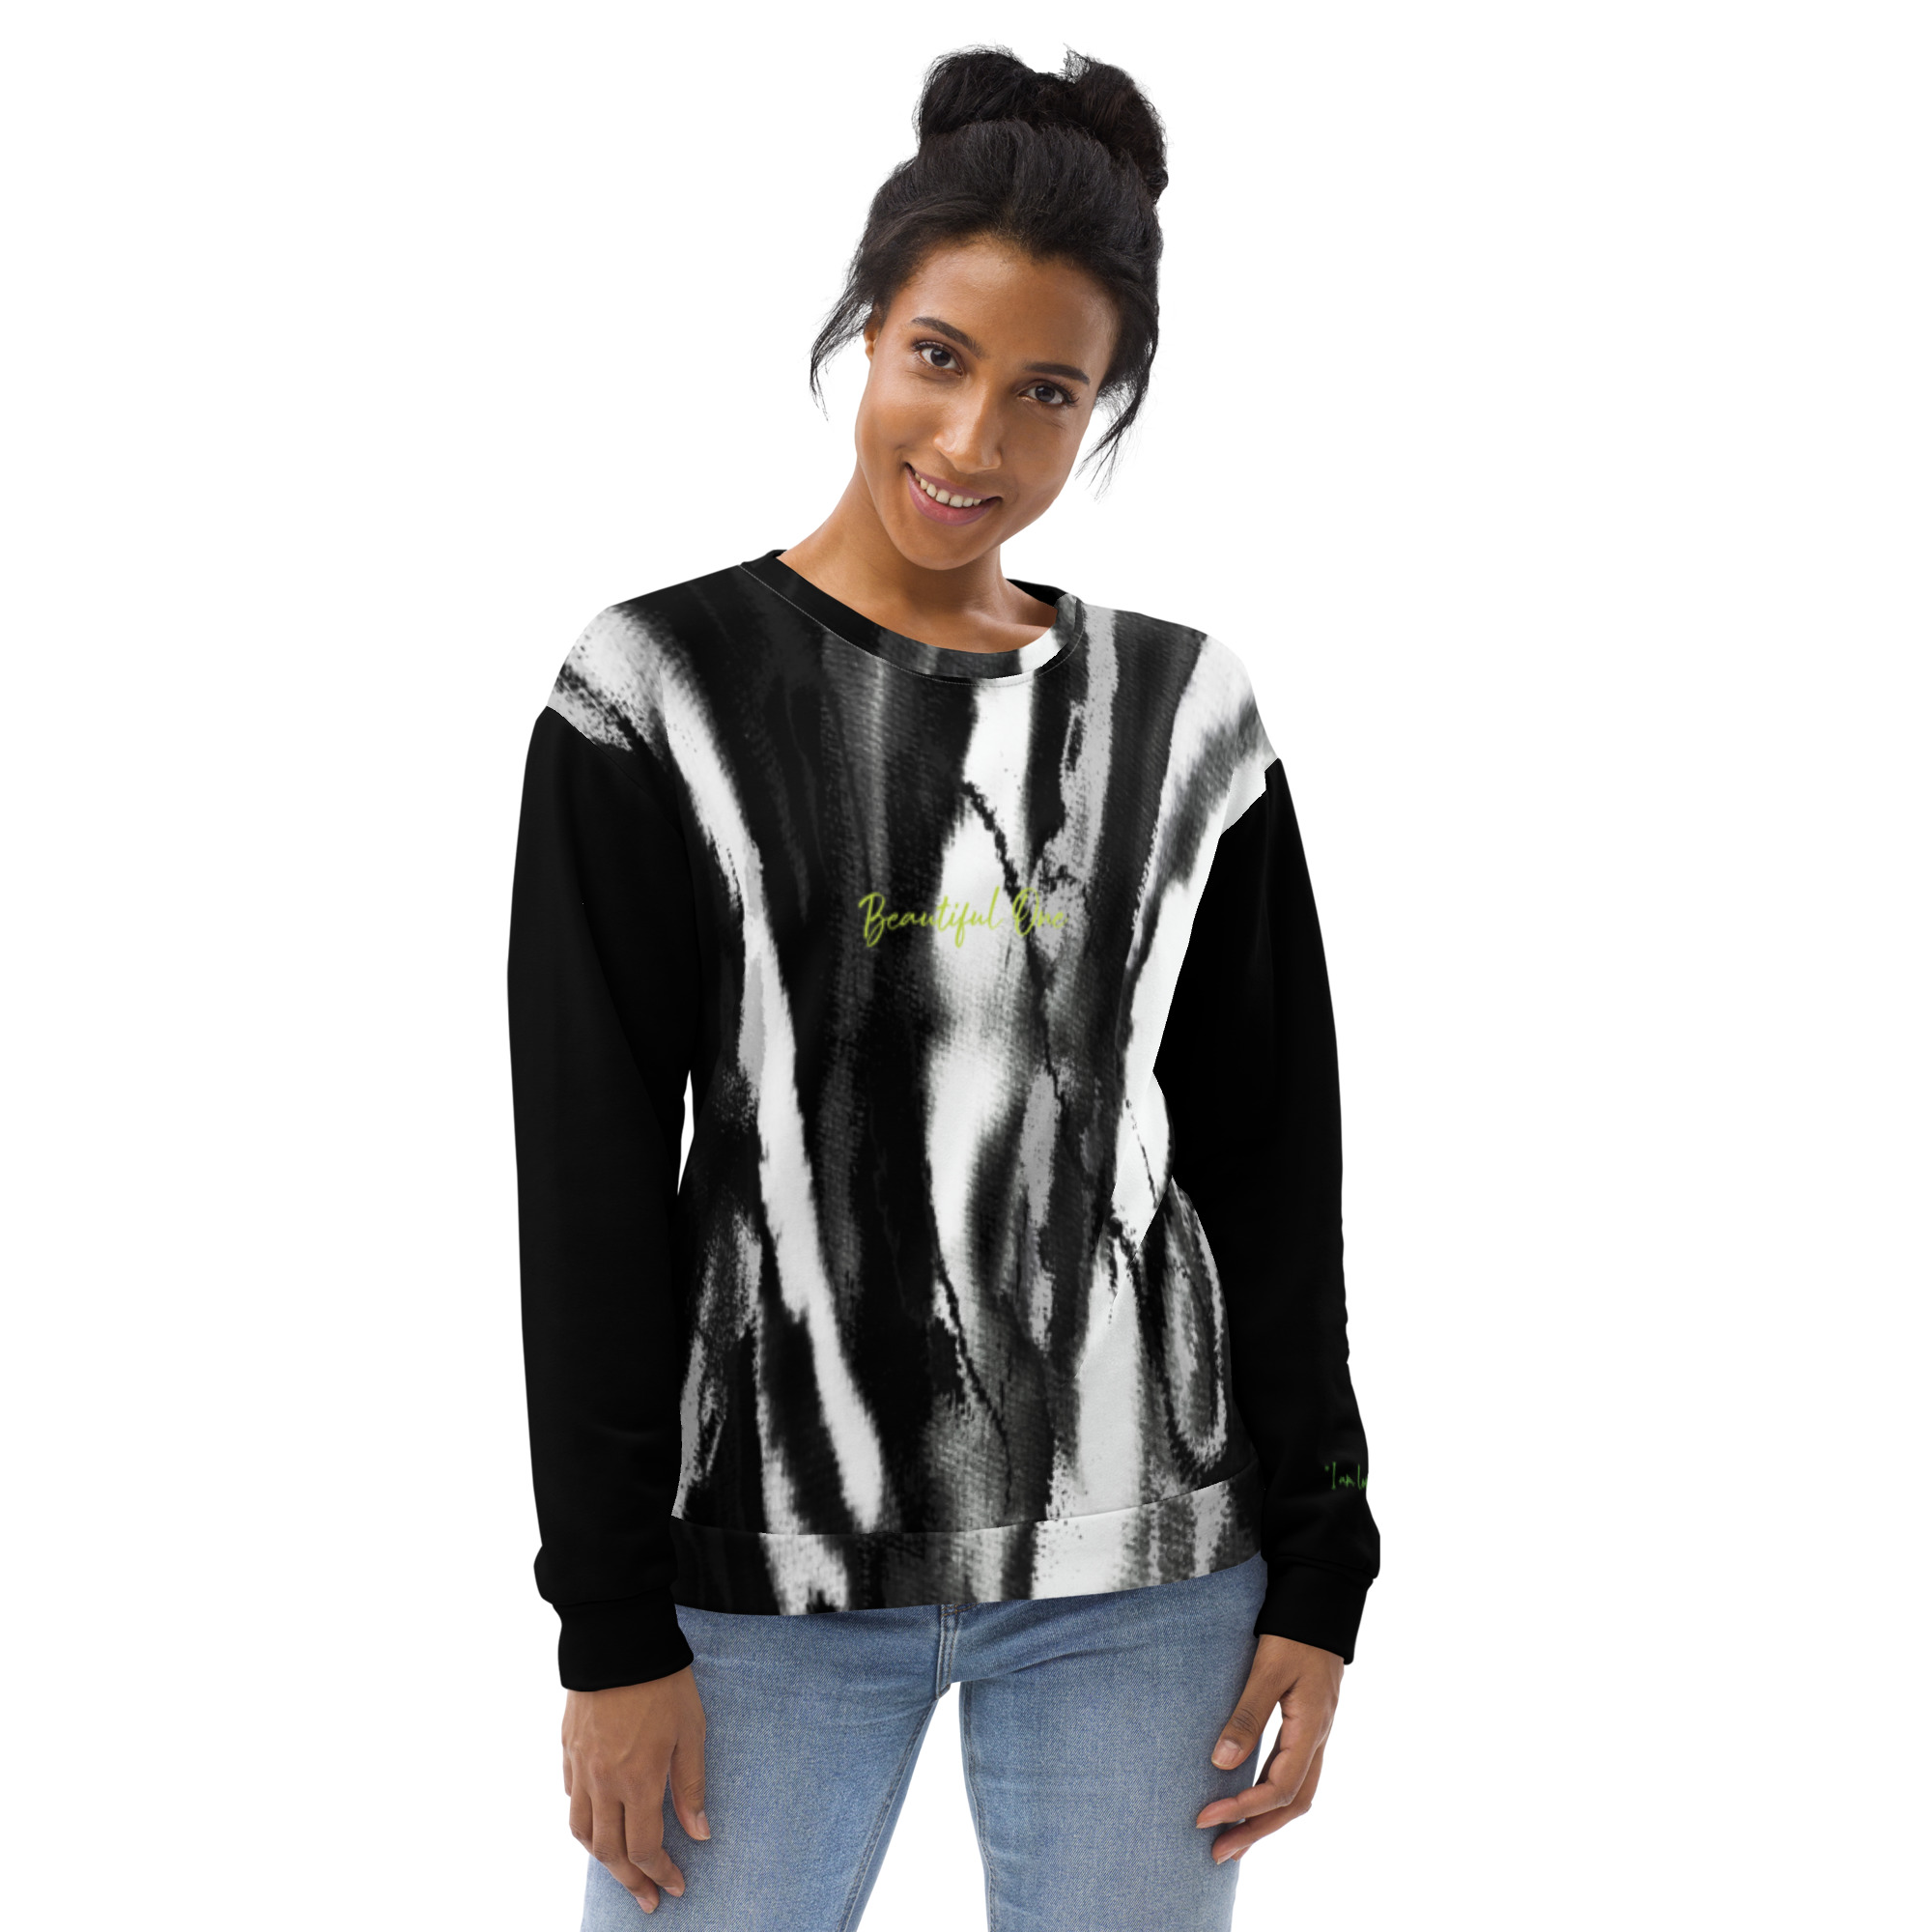 all-over-print-unisex-sweatshirt-white-front-6398a254ab010.jpg